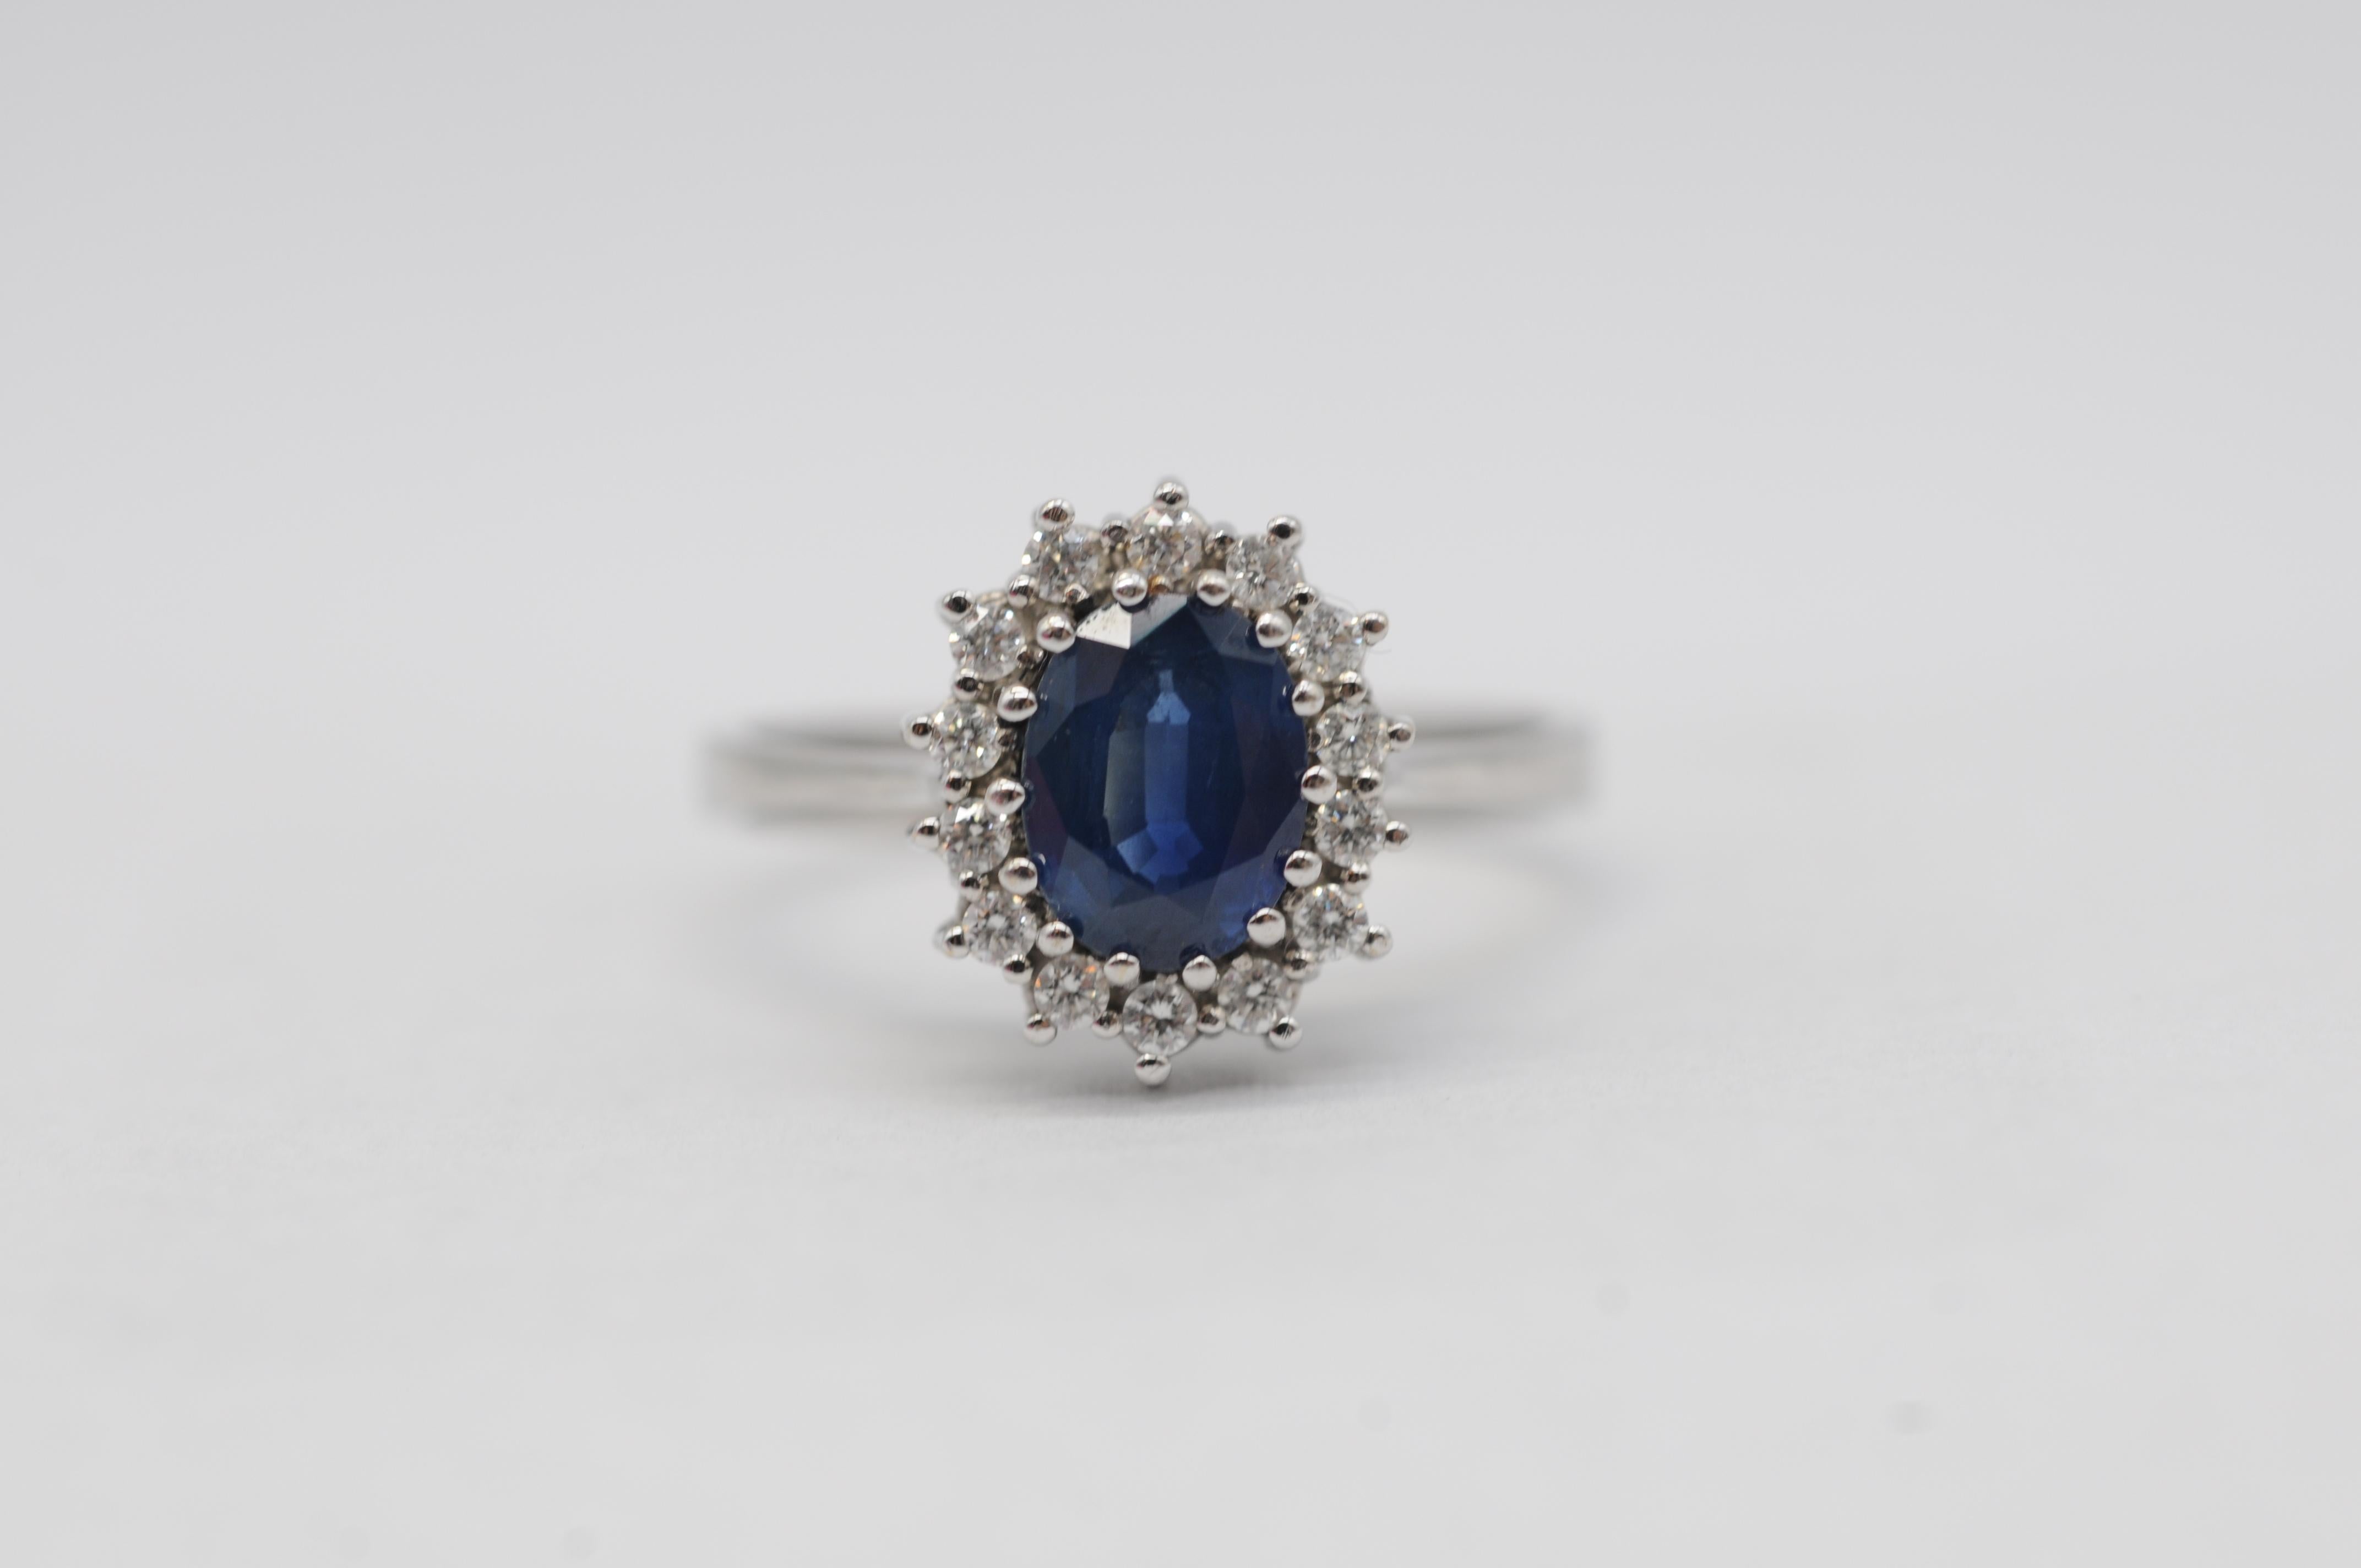 Aesthetic Movement Exquisite gold ring with sapphire and diamonds, like Lady Diana's engagement For Sale